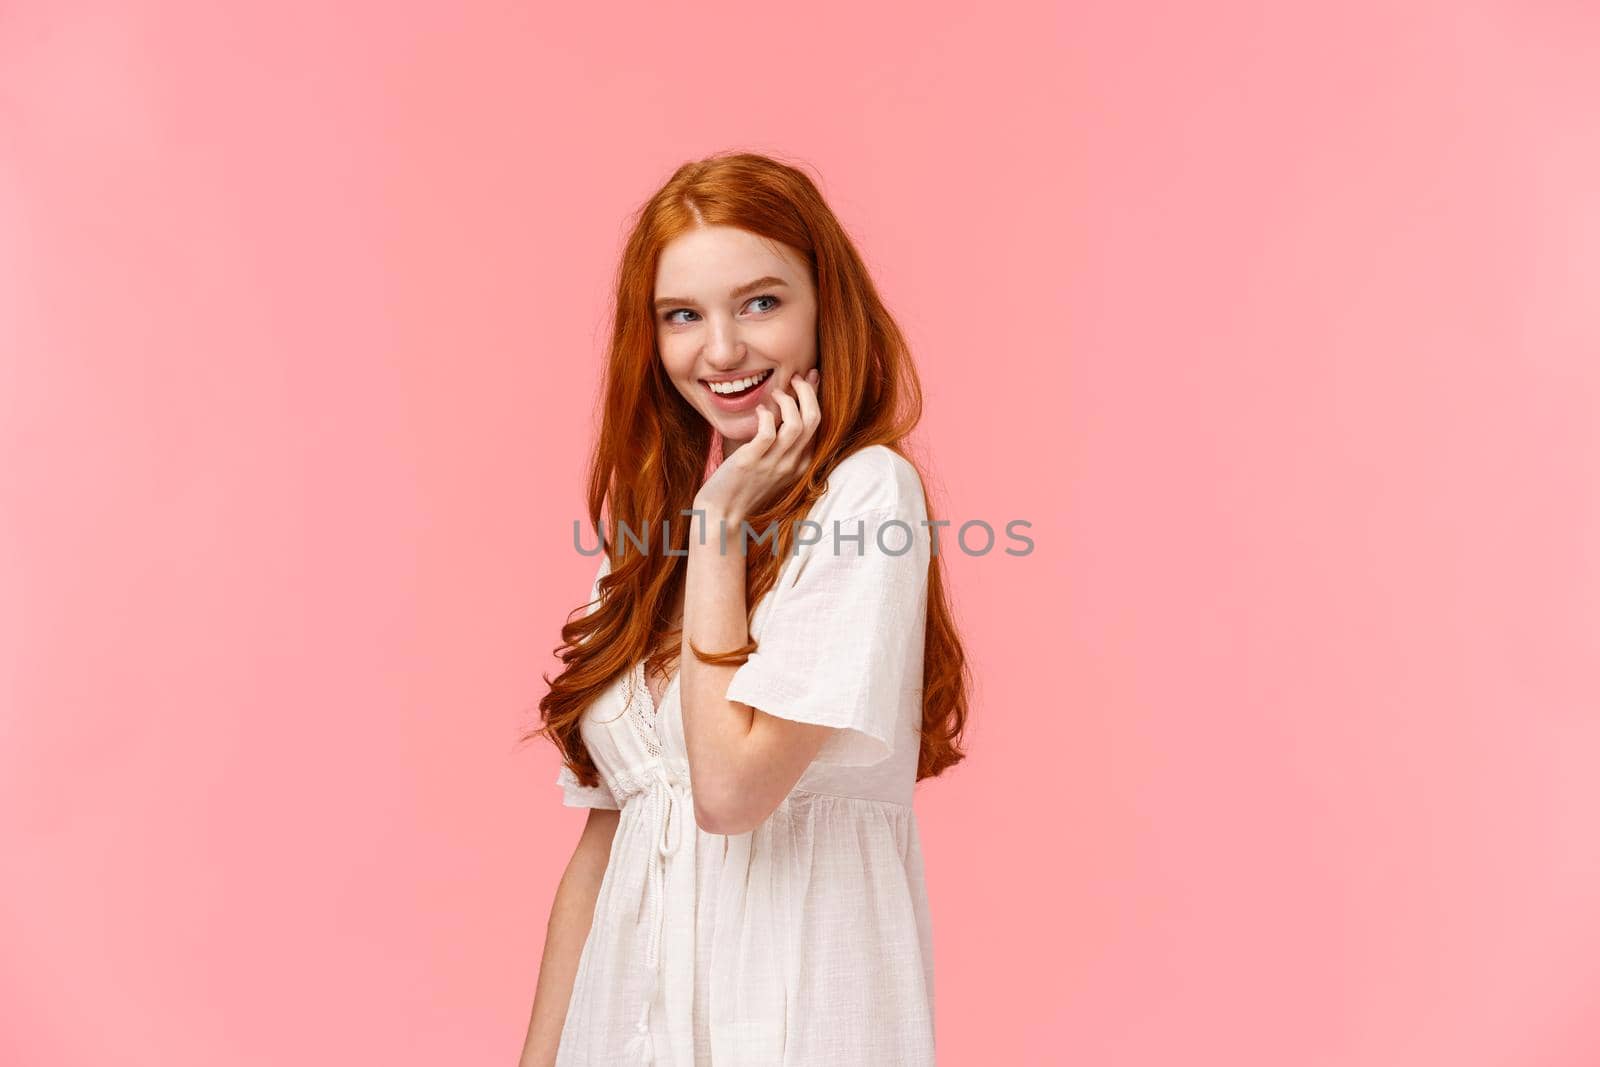 Waist-up portrait seducative and sensual, coquettish redhead flirty woman in white dress, glancing right smiling curiously, standing pink background intrigued, checking out something interesting.